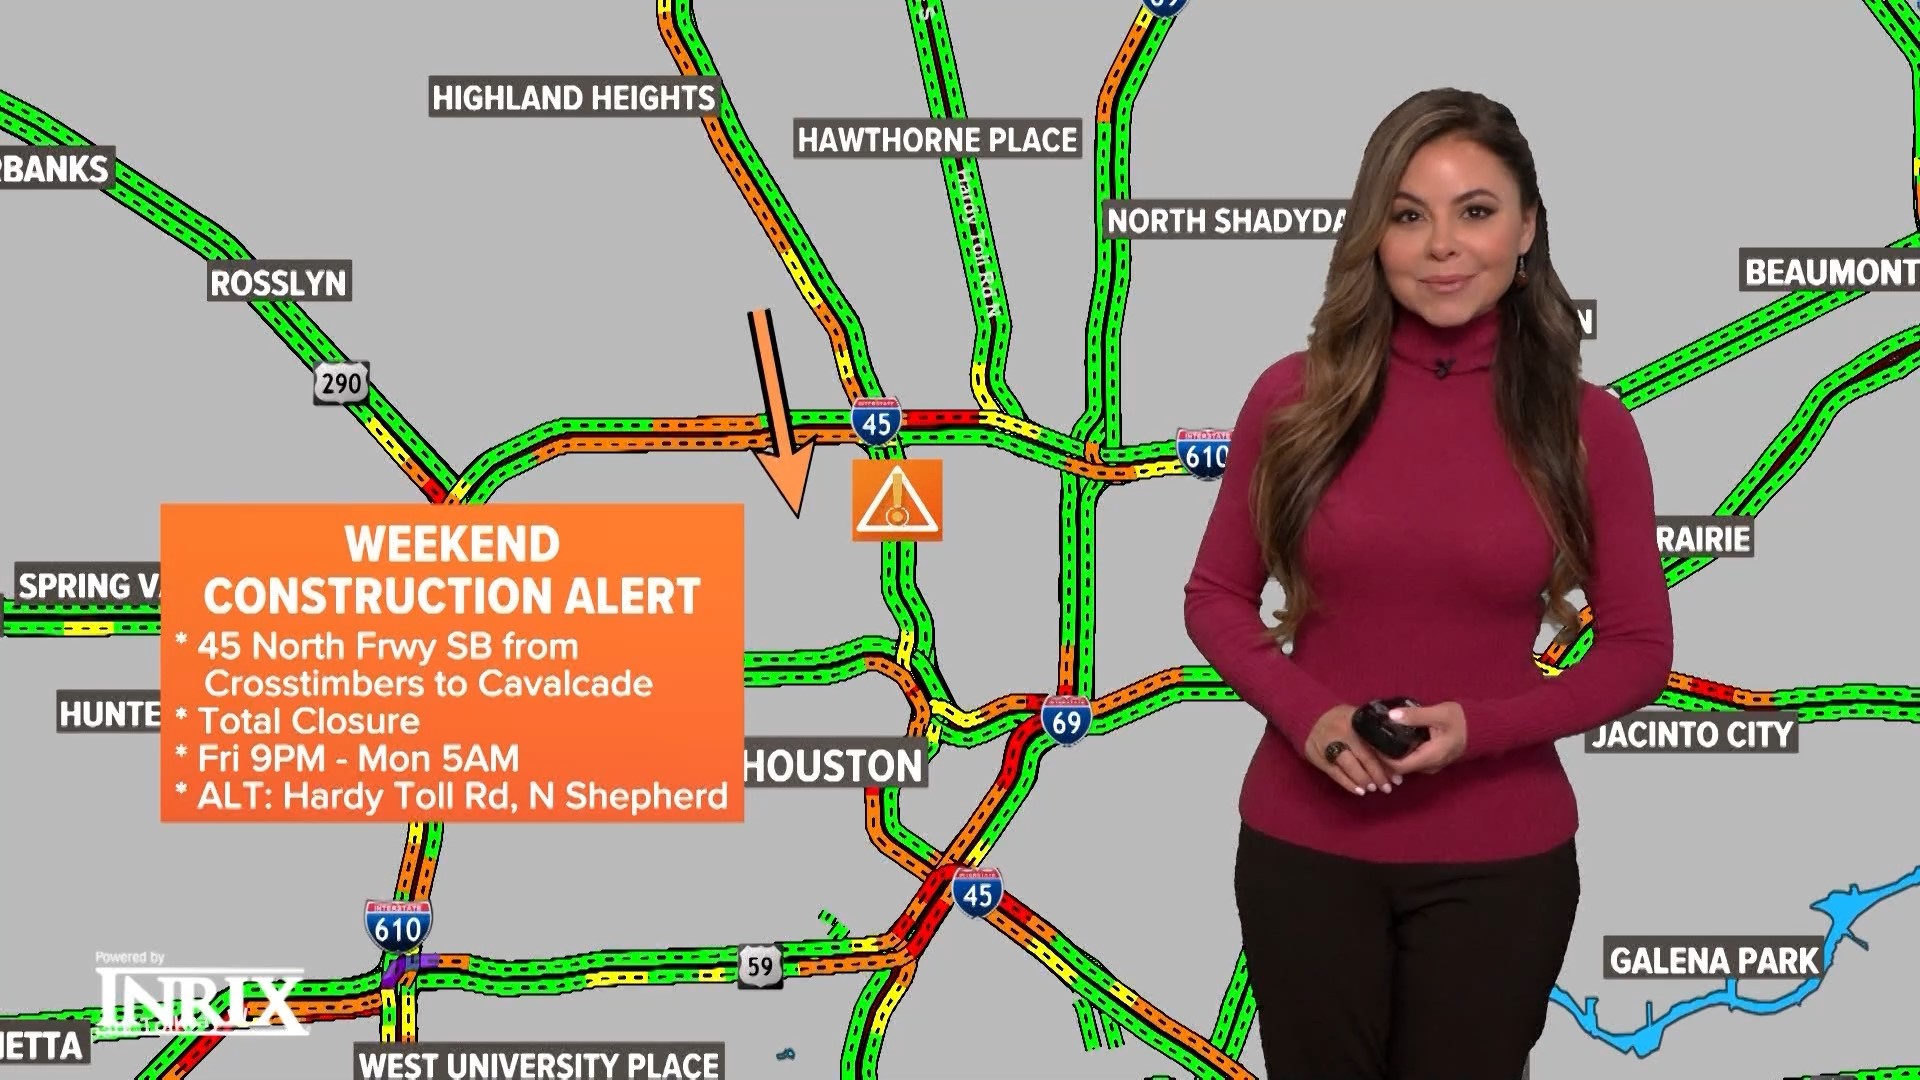 You'll want to take a second to see how to avoid this major issue on Houston's roads this weekend.